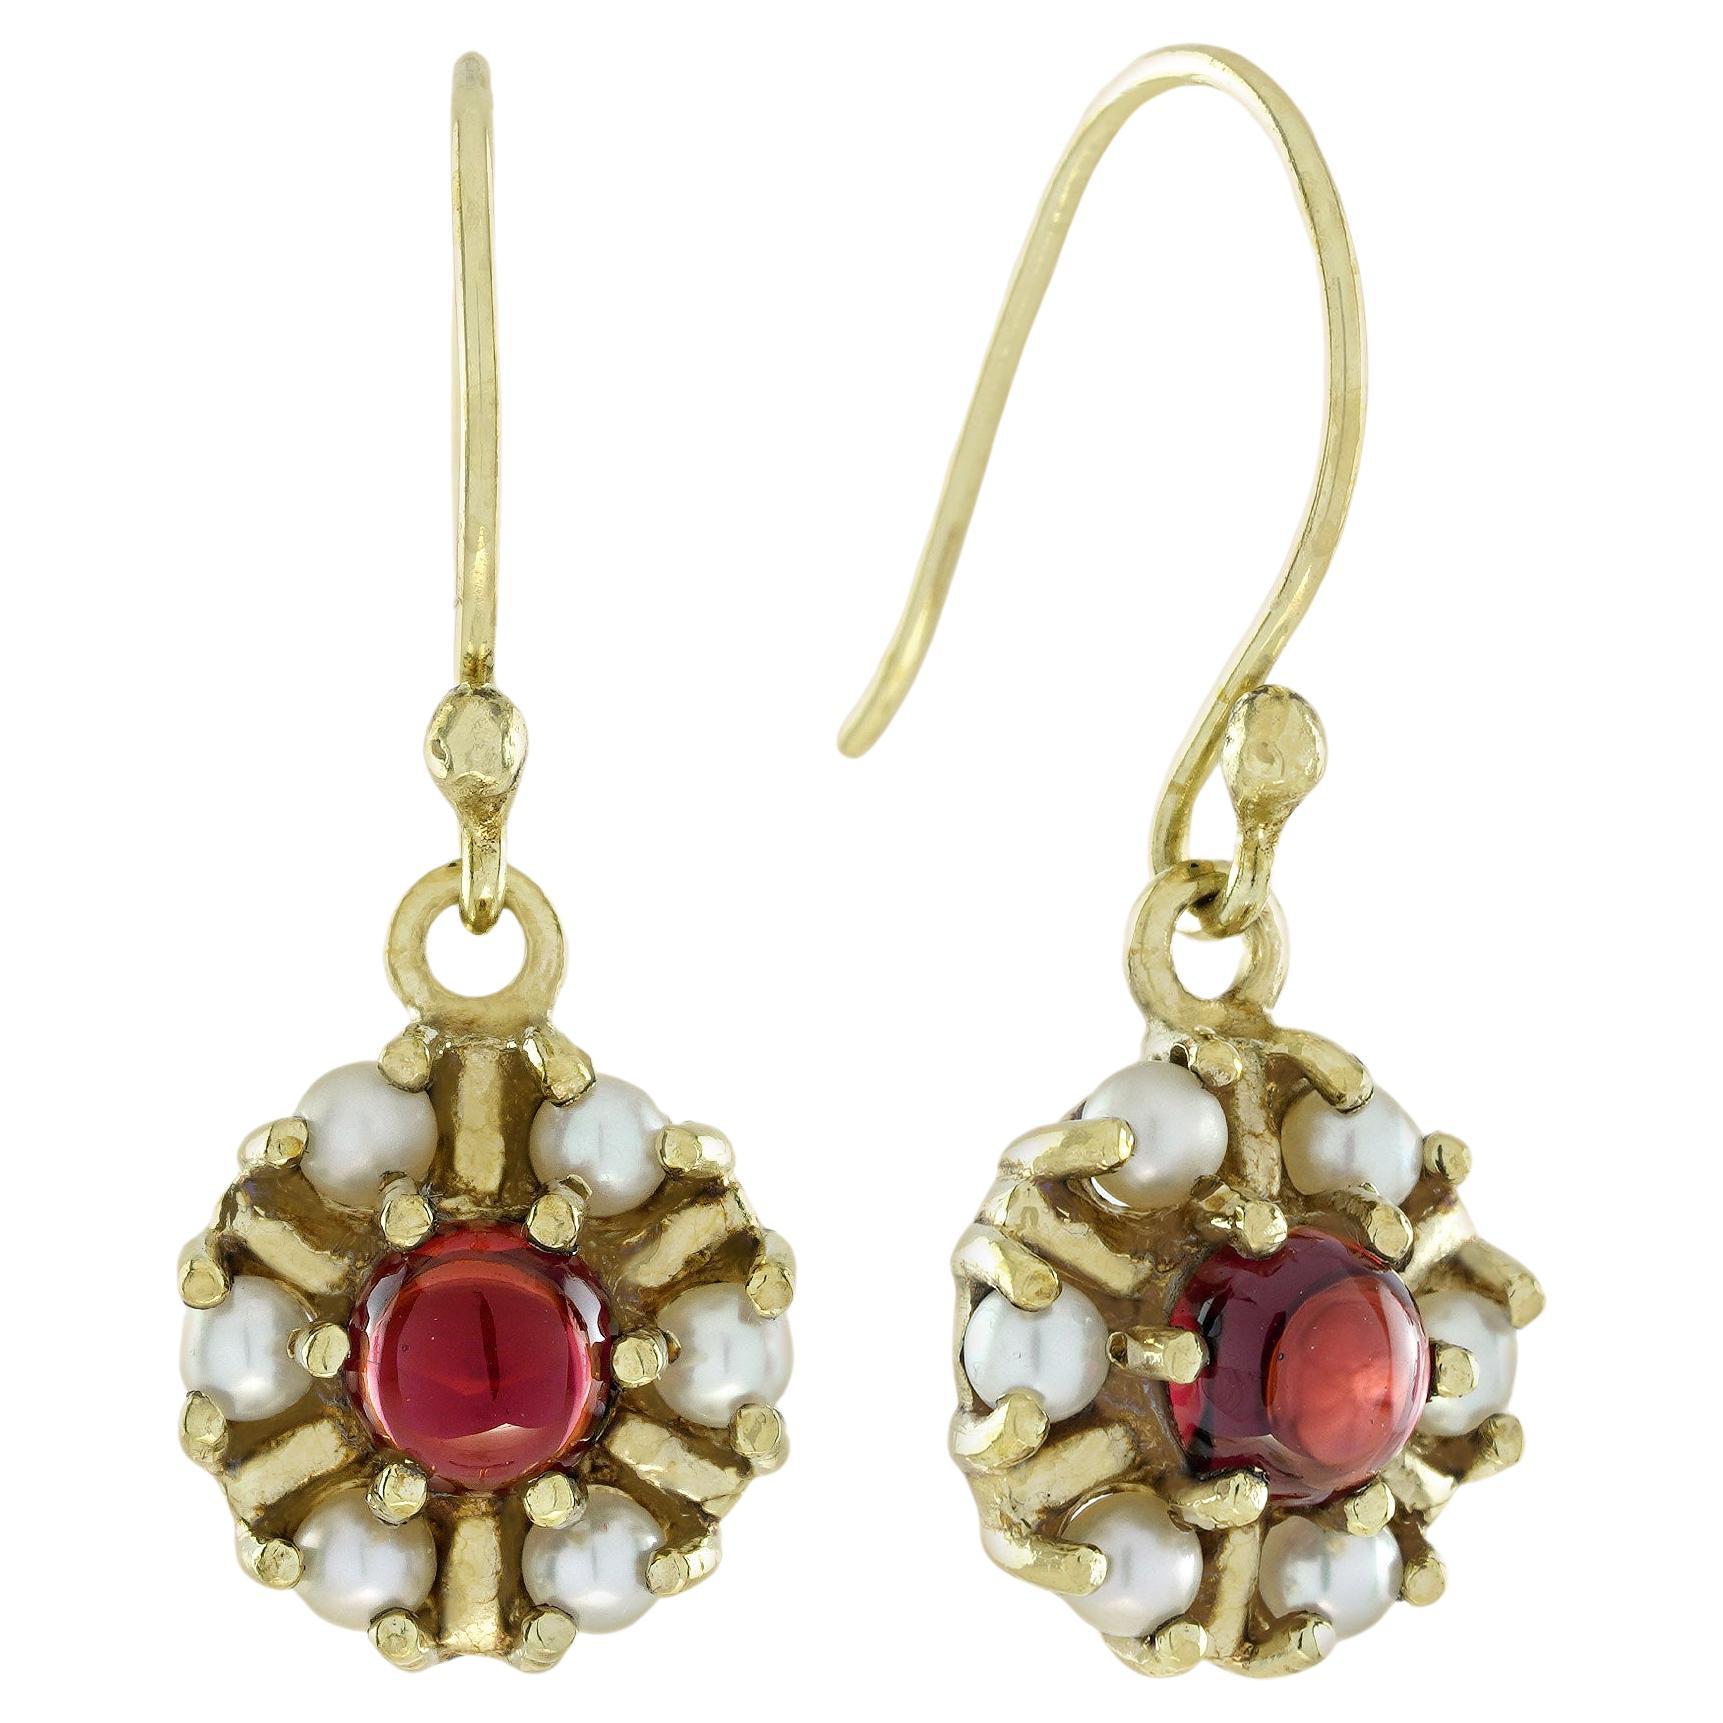 Natural Cabochon Garnet and Pearl Vintage Style Floral Drop Earrings in 9K Gold For Sale